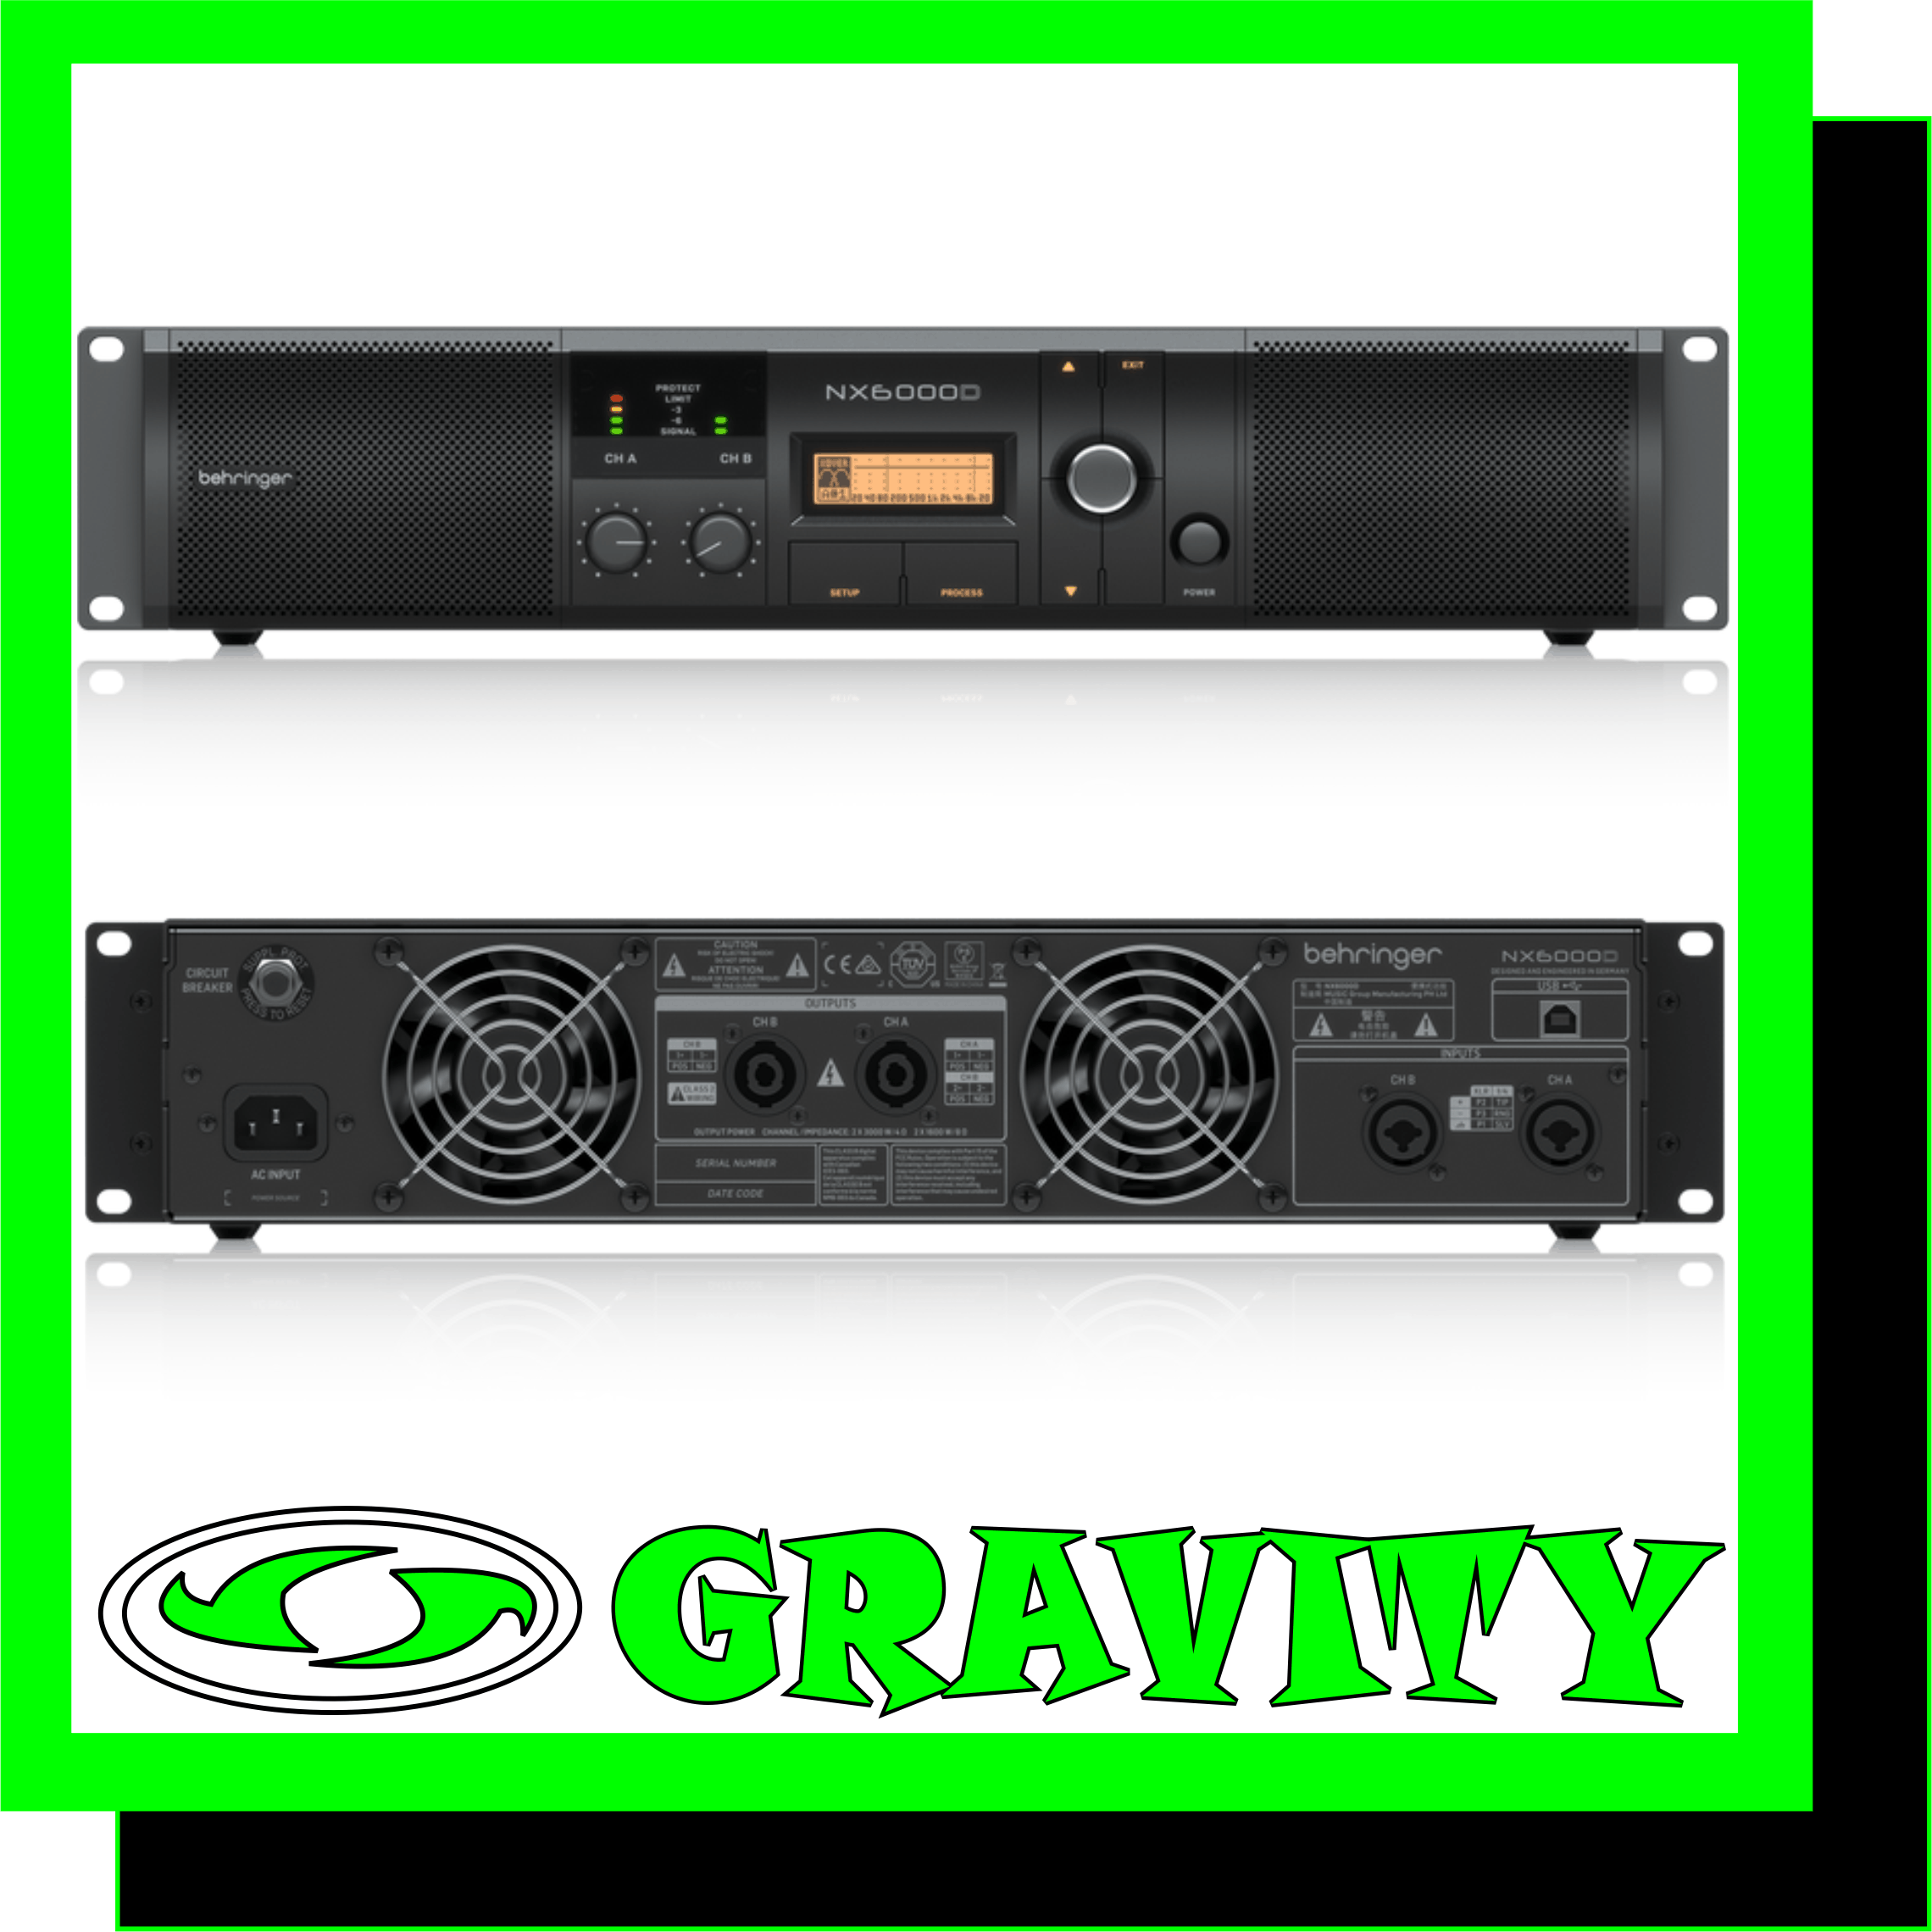 NX6000D Ultra-Lightweight 6000-Watt Class-D Power Amplifier with DSP Control and SmartSense Loudspeaker Impedance Compensation  -Delivers 2 x 3000 Watts into 4 Ohms, 2 x 1600 Watts into 8 Ohms and weighs less than 13.2 lbs / 6.0 kg -Ultimate reliability through revolutionary cool-running High-Density Class-D technology with “near-zero” thermal buildup -Ultra-efficient switch-mode power supply for noise-free audio, superior transient response and low power consumption -High-performance DSP and 24-bit/96 kHz converters deliver ultimate signal integrity and extreme dynamic range -DSP section features sophisticated delay, crossover (3 filter types, up to 48 dB/octave), EQ (8 parametric, 2 dynamic), dynamics processing and lockable security settings -SmartSense Loudspeaker impedance compensation features fully linear frequency response at any speaker load impedance -Front panel LCD display enables setup and adjustment without PC -Can be set up, controlled and monitored via rear panel USB connector. Powerful remote software downloadable at behringer.com -“Zero-Attack” limiters offer maximum output level with reliable overload protection -Built-in Subwoofer/Satellite crossover for perfect subwoofer operation -Detented and illuminated gain controls for precise level setting -Precise 4-segment Signal and Limit LEDs to monitor performance -XLR and 1/4” TRS combination input connectors for compatibility with any source -Professional twist-lock speaker connectors for ultimate reliability -Independent DC, LF and thermal overload protection on each channel automatically protects amplifier and speakers without shutting down the show -“Back-to-front” ventilation system prevents thermal buildup for reliable operatio  NX6000D The NX6000D power amplifier packs 6000 Watts (2 x 3000 Watts @ 4 Ohms; 2 x 1600 Watts @ 8 Ohms) into exceptionally lightweight (13.2 lbs / 6.0 kg) and rack-mountable packages. Plus, the built-in DSP and 24-bit/ 96 kHz converters ensure the ultimate signal integrity with an extremely broad dynamic range. And because the NX6000D is so much more efficient than conventional designs, it runs cooler and doesn’t require the massive heat sinks and heavy toroid transformers typically associated with its conventional counterparts. Thanks to our “Zero-Attack” limiters that offer maximum output level with exceptionally-reliable overload protection and SmartSense Loudspeaker impedance compensation, which provides fully linear frequency response at any speaker load impedance, you can run the NX6000D full-out for hours on-end. Our revolutionary high-density Class-D technology, combined with an ultra-efficient, switch-mode power supply ensure this feather-light powerhouse will drive your rig effortlessly for many years to come.  Class-D – Massive Power, Perfect Sound Thanks to our High-Density Class-D amplifier Technology, we are able to provide you with enormous power and incredible sonic performance in an easy-to-use, ultra-portable and lightweight package. Class-D amplification makes all the difference, offering the ultimate in energy efficiency – and eliminating the need for heavy power supplies and massive heat sinks. This amazing technology makes it possible to design and build extremely-powerful products that are significantly lighter in weight than their traditional counterparts, while using less energy and protecting the environment.  Sublimely Simple Operation The front panel controls and indicators provide your system’s vital signs at a glance. After pressing the Power button, the Power LED lights to show the amp is ready for action. All channels feature positive-detent Gain controls with Signal LEDs that light when a signal is present, as well as Limit LEDs to indicate when the amplifier is running at full capacity. Just as elegant as the front, the rear panel is home to the combo XLR and 1/4? TRS Input connectors, making the NX6000D compatible with virtually any source, balanced or unbalanced. Professional twist-lock speaker sockets are provided to ensure every drop of output power gets to your loudspeakers.  NX DSP For sound engineers requiring high-level control capability, the NX6000D amplifier comes ready for action right out-of-the-box. The built-in DSP and 24-bit/96 kHz converters ensure the ultimate signal integrity with an extremely broad dynamic range. DSP section features sophisticated delay, crossover (3 filter types, up to 48 dB/octave), EQ (8 parametric, 2 dynamic), dynamics processing and lockable security settings. A convenient front panel LCD display allows you to setup and make adjustments directly at the amplifier, without the need for a PC.  SmartSense Impedance Compensation Our new SmartSense Technology puts the punch back into Class-D amplification, providing vastly improved full-range frequency response with more powerfully-dynamic bass, and smoother high-frequency reproduction. The resulting output is no longer dependent on the actual load, but is rendered perfectly ruler flat via impedance compensation. NX6000D’s design also incorporates a significantly-higher damping factor that yields better amplifier control over the loudspeaker for stronger audio reproduction – especially in the LF area.